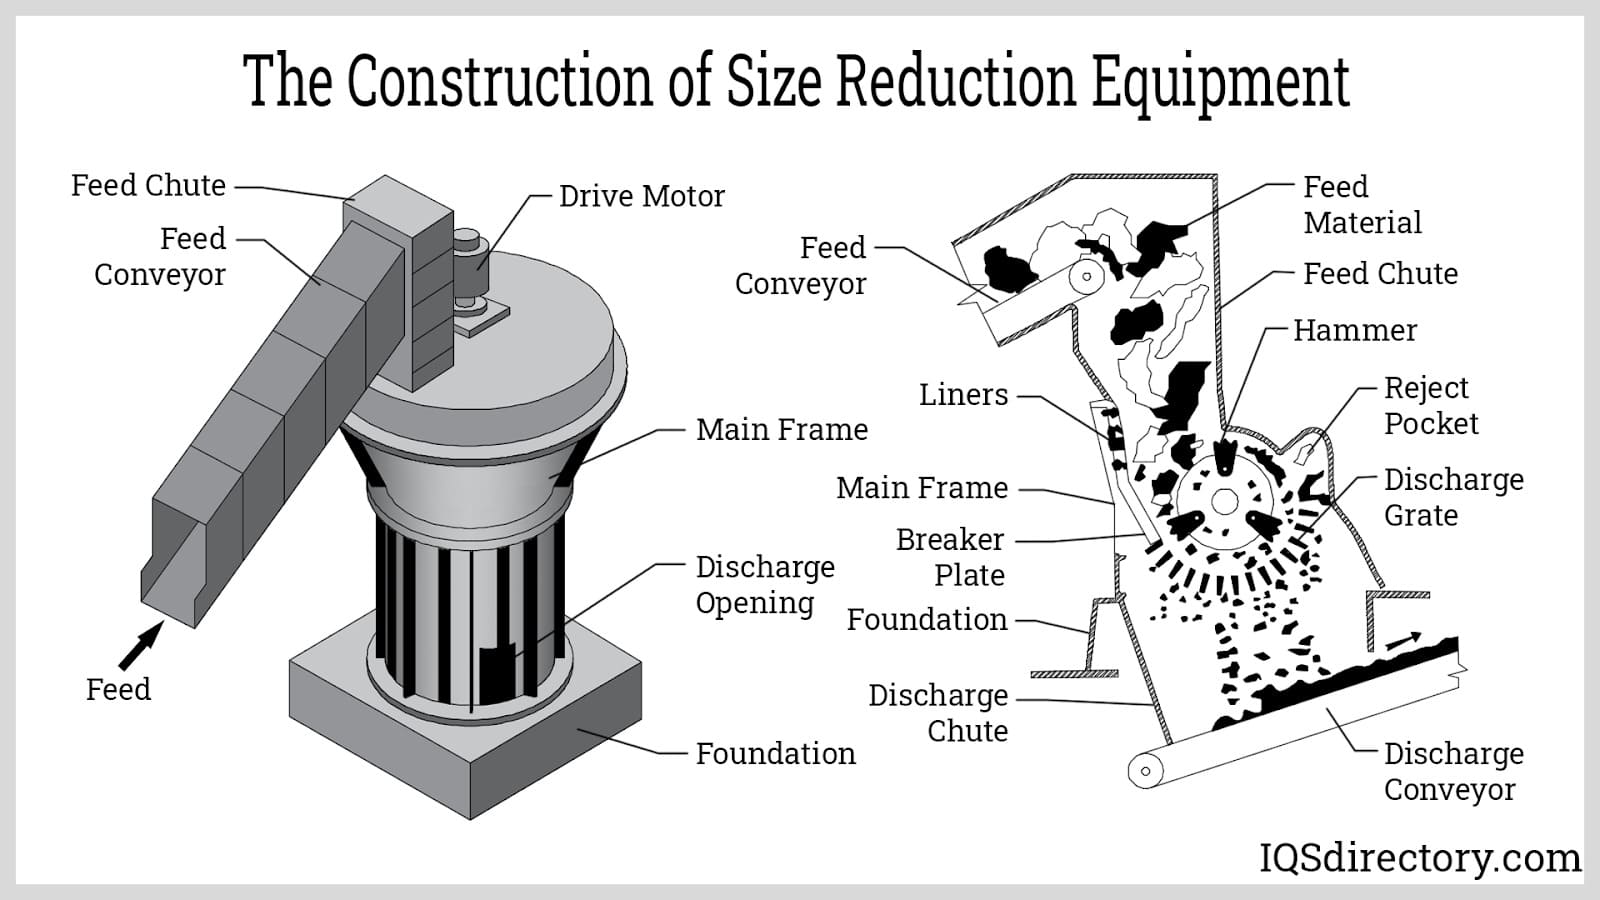 The Construction of Size Reduction Equipment